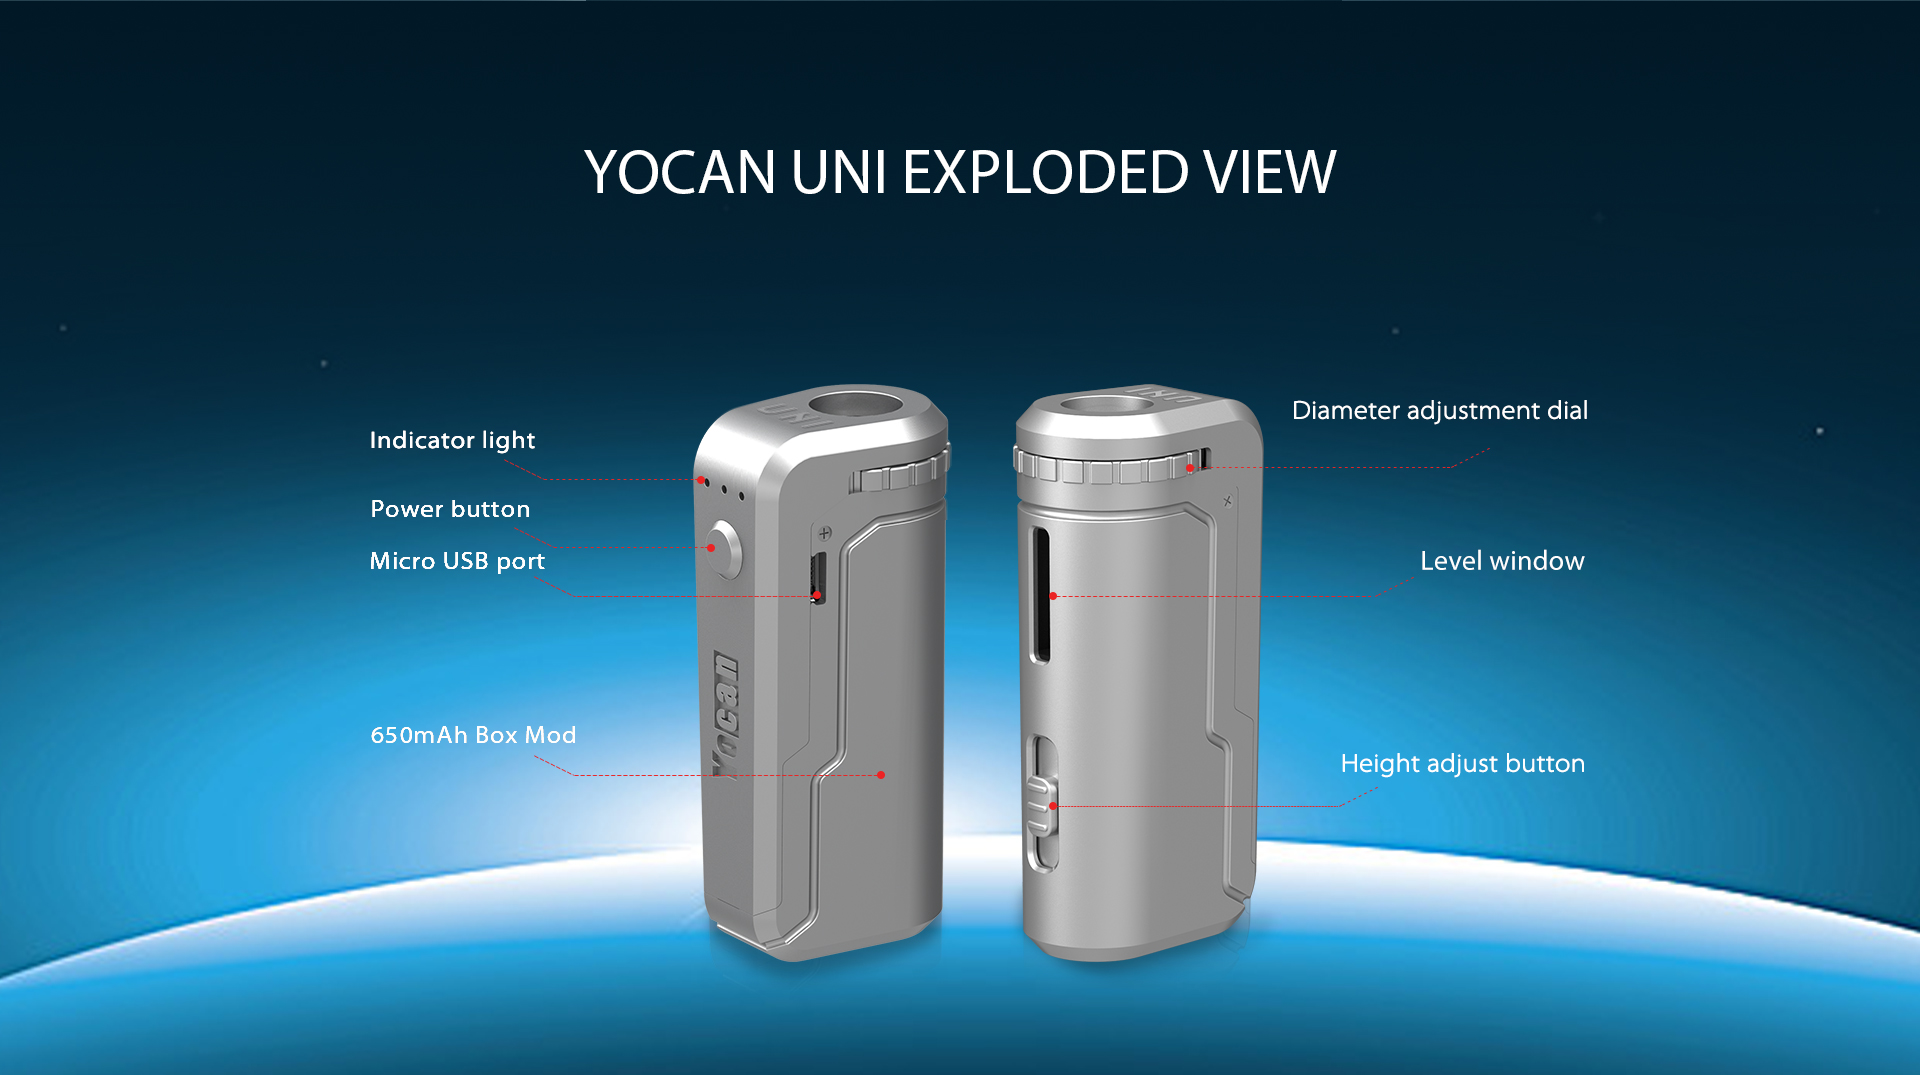 Yocan UNI exploded view.